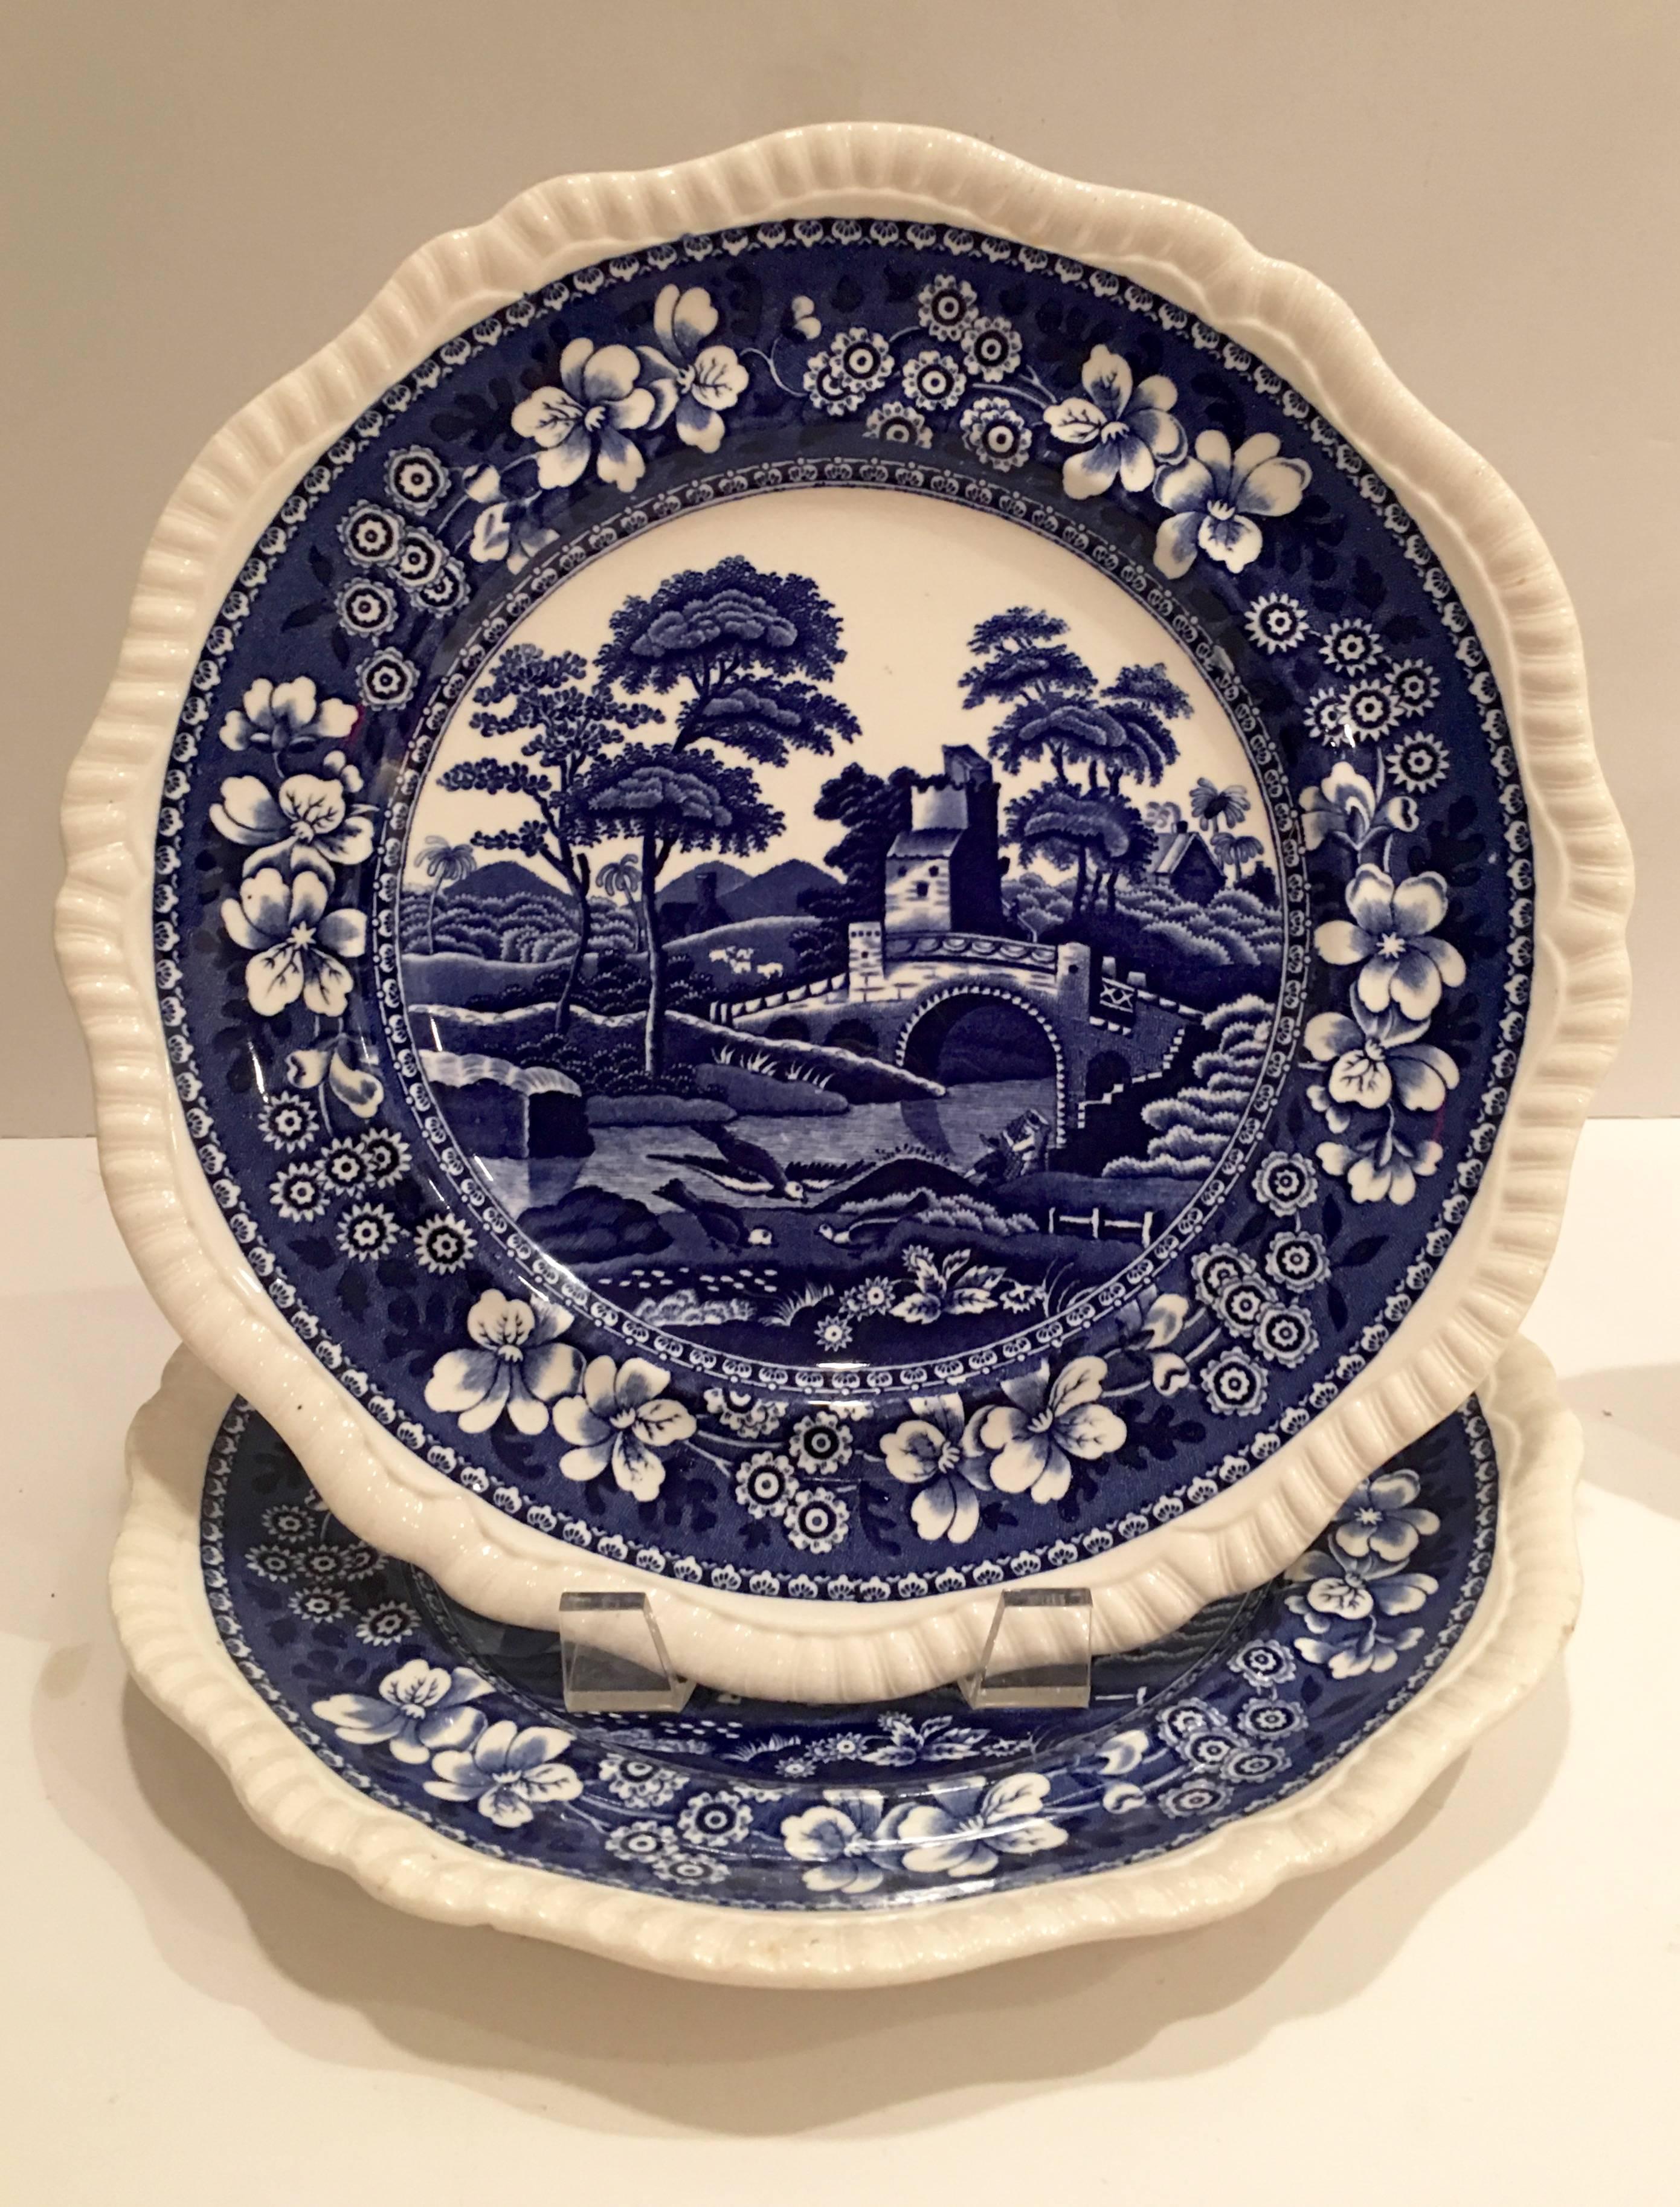 Set of five English Transferware by, Copeland Spode in Blue Tower pattern. Set includes two dinner plates and three salad/dessert plates. Salad/dessert plate measures, 7.75 diameter. Marks on underside indicate older production.